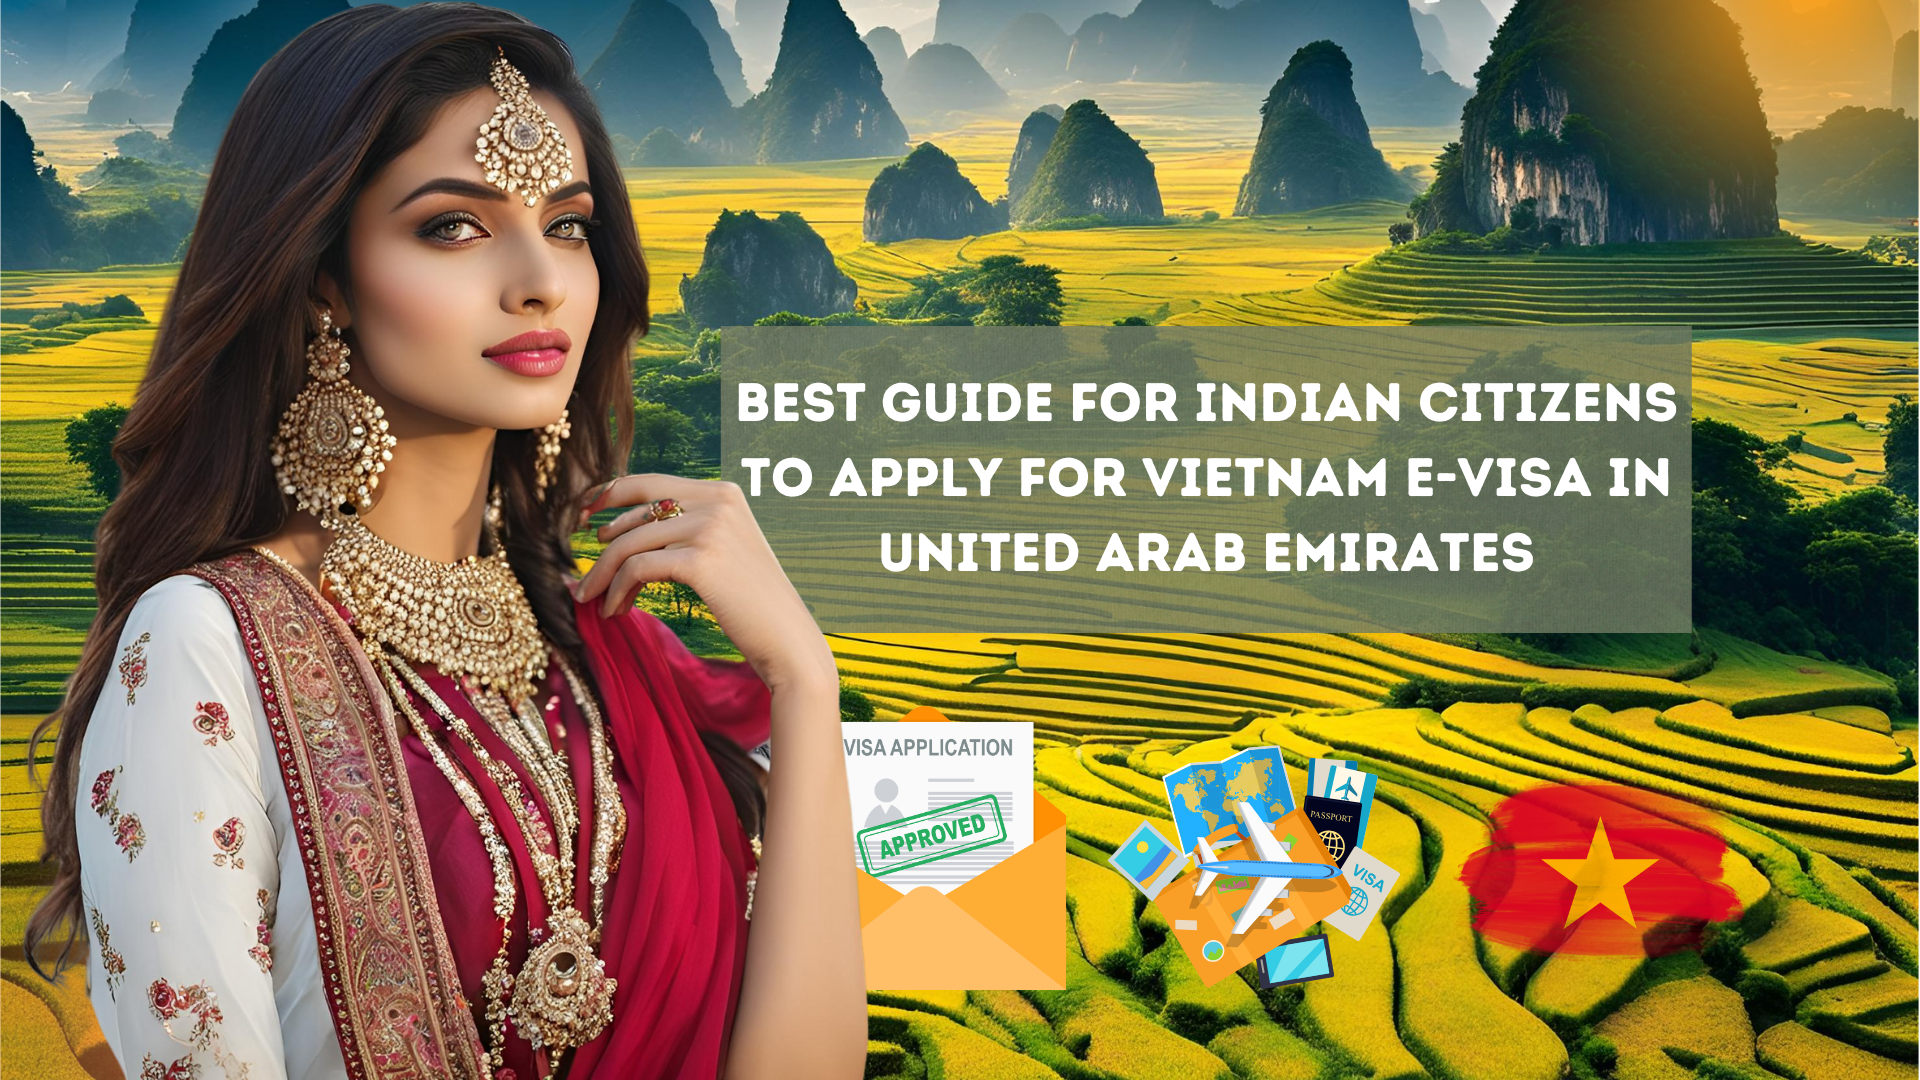 Best Guide for Indian Citizens to Apply for Vietnam E-Visa in United Arab Emirates